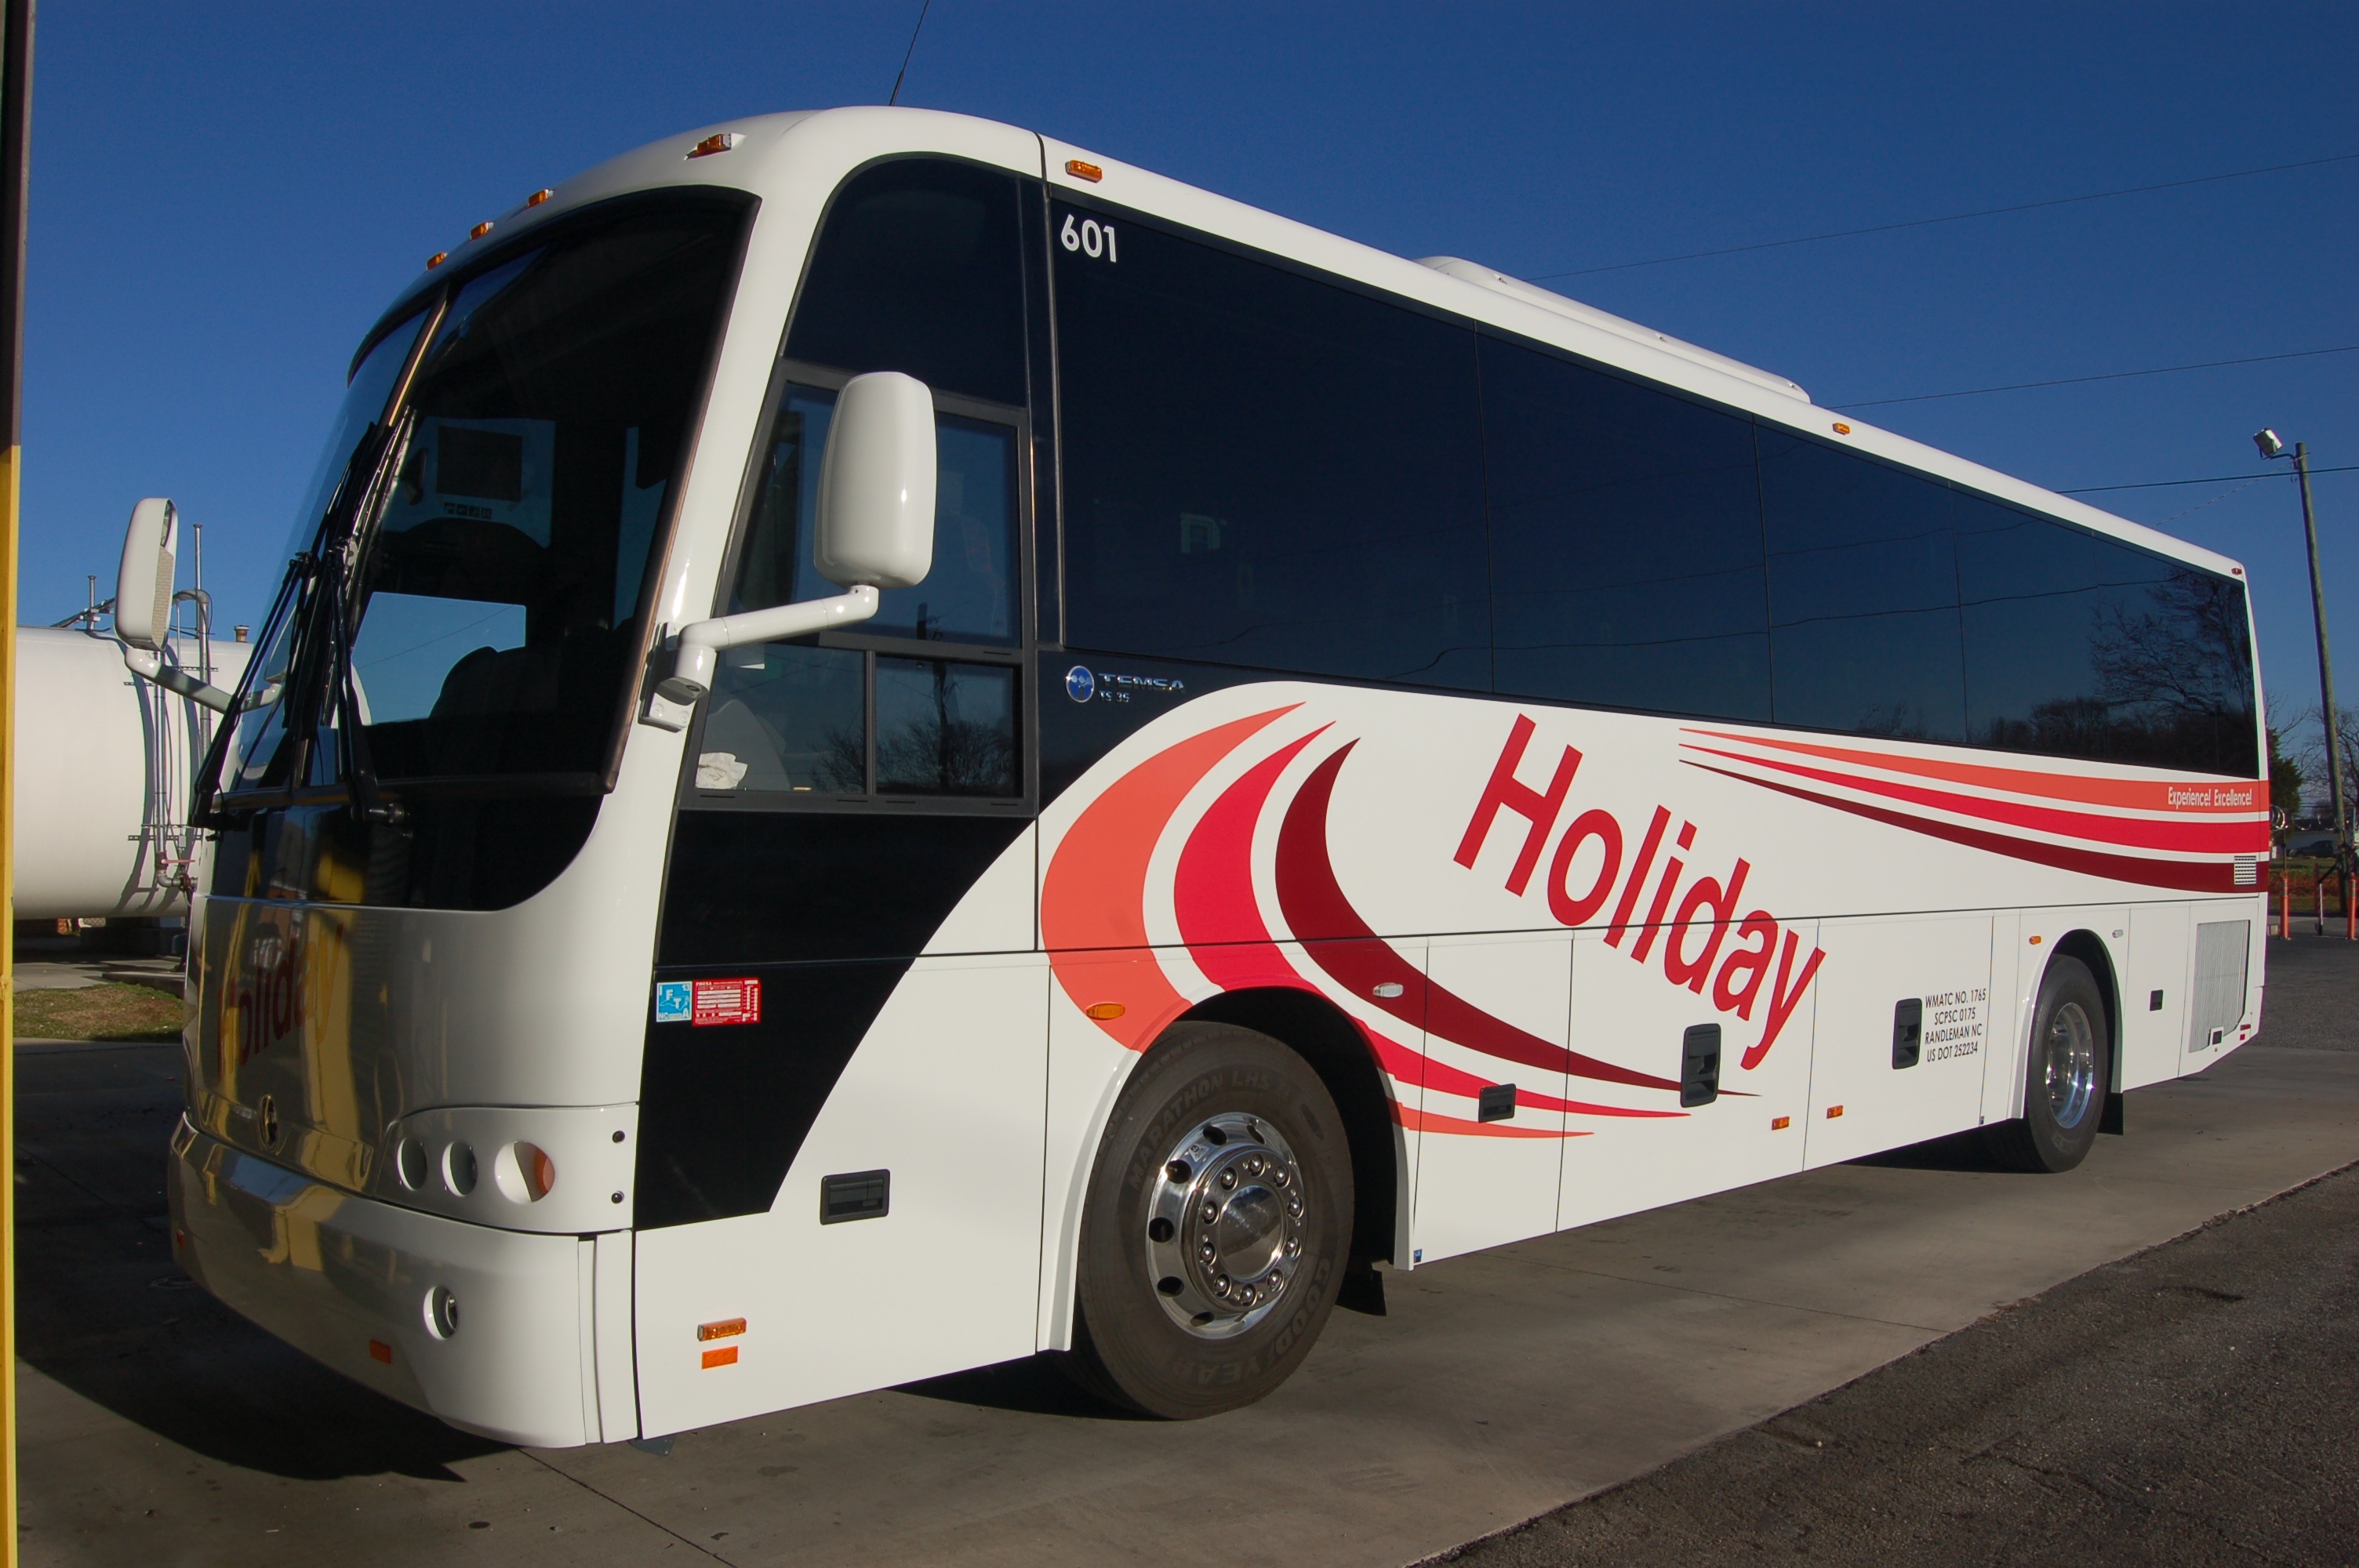 holiday tours bus